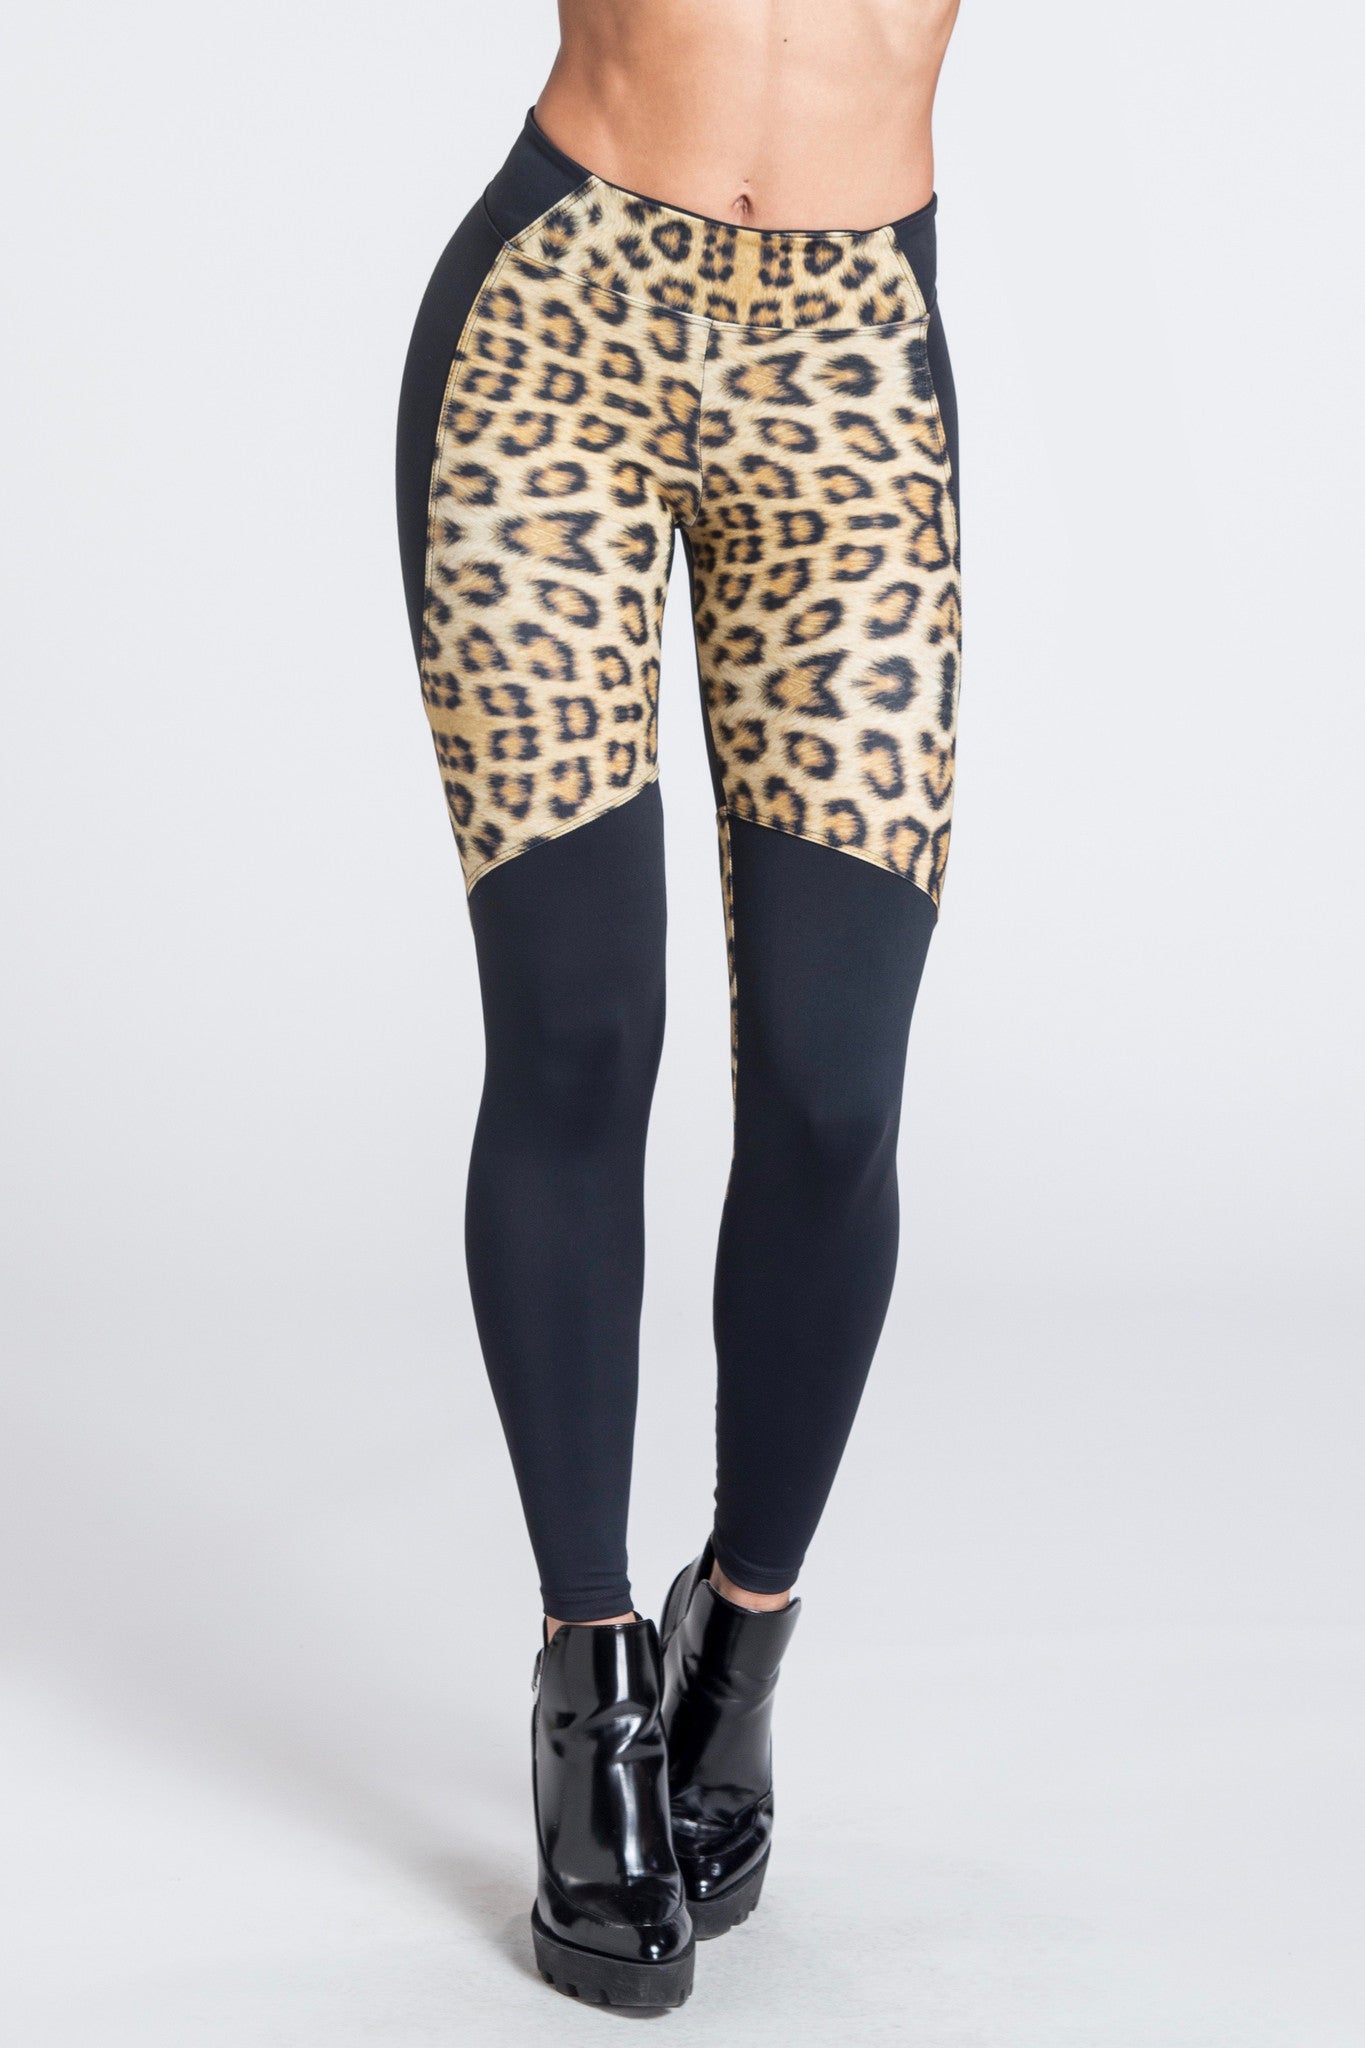 US$26.33-Leopard Sport Suit For Fitness Yoga Sets Women Gym Clothing  Seamless Workout Sportswear Printed Leggings And Sport Bra O-Description